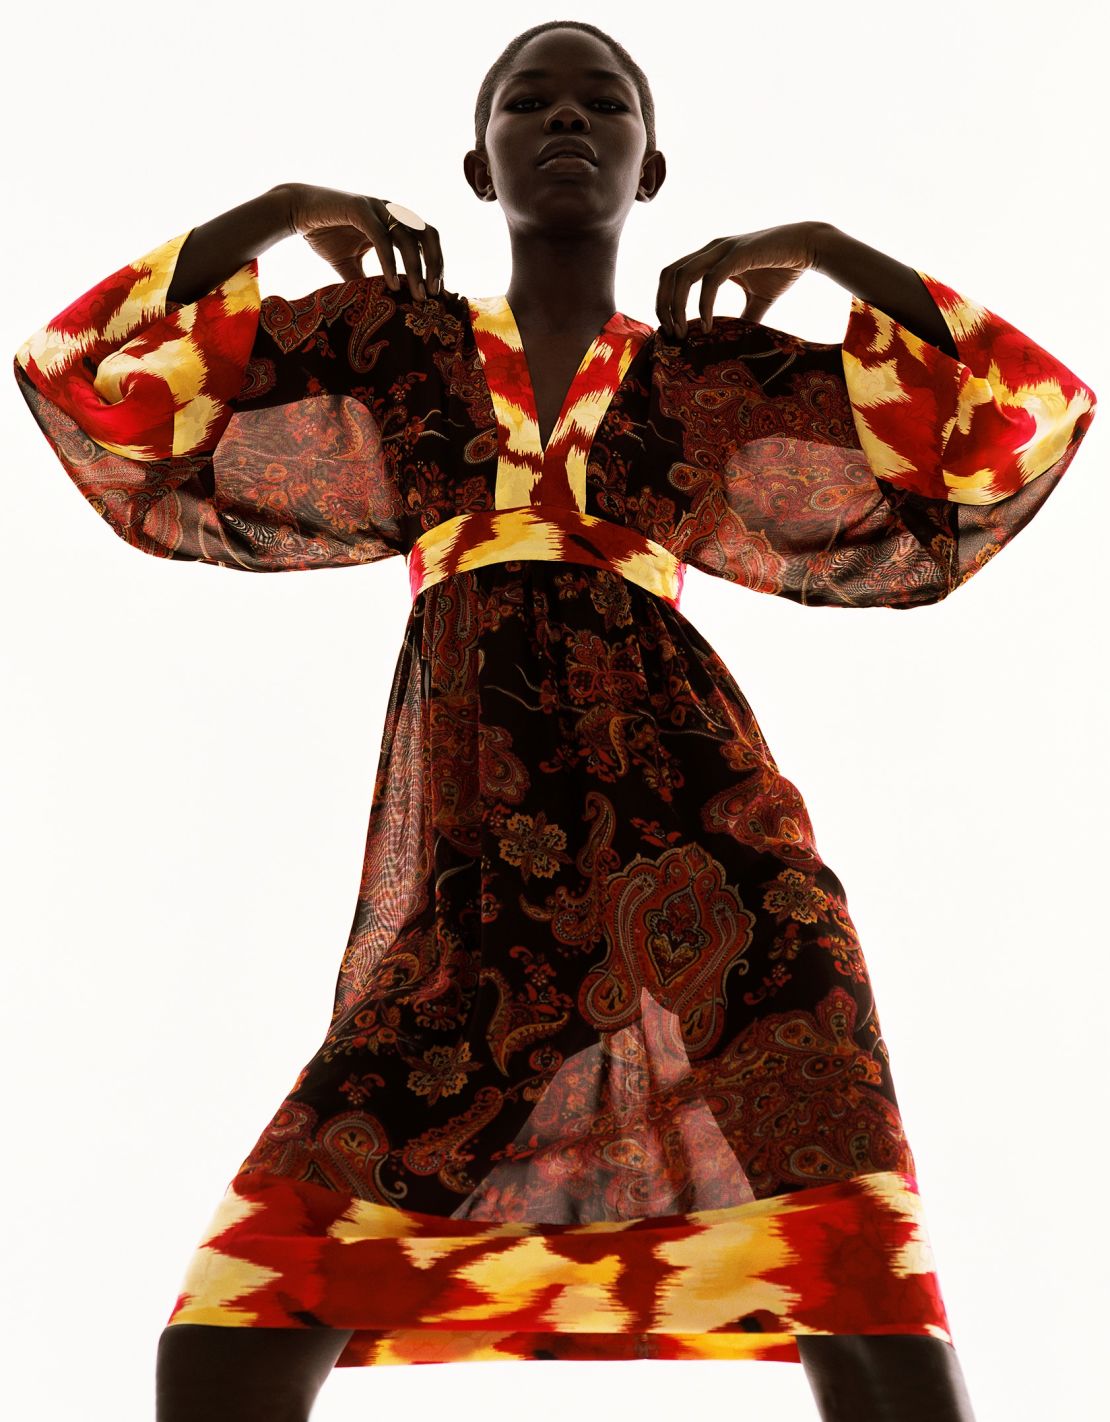 Michelle Obama-approved designer Duro Olowu’s pursuit of the ‘culture ...